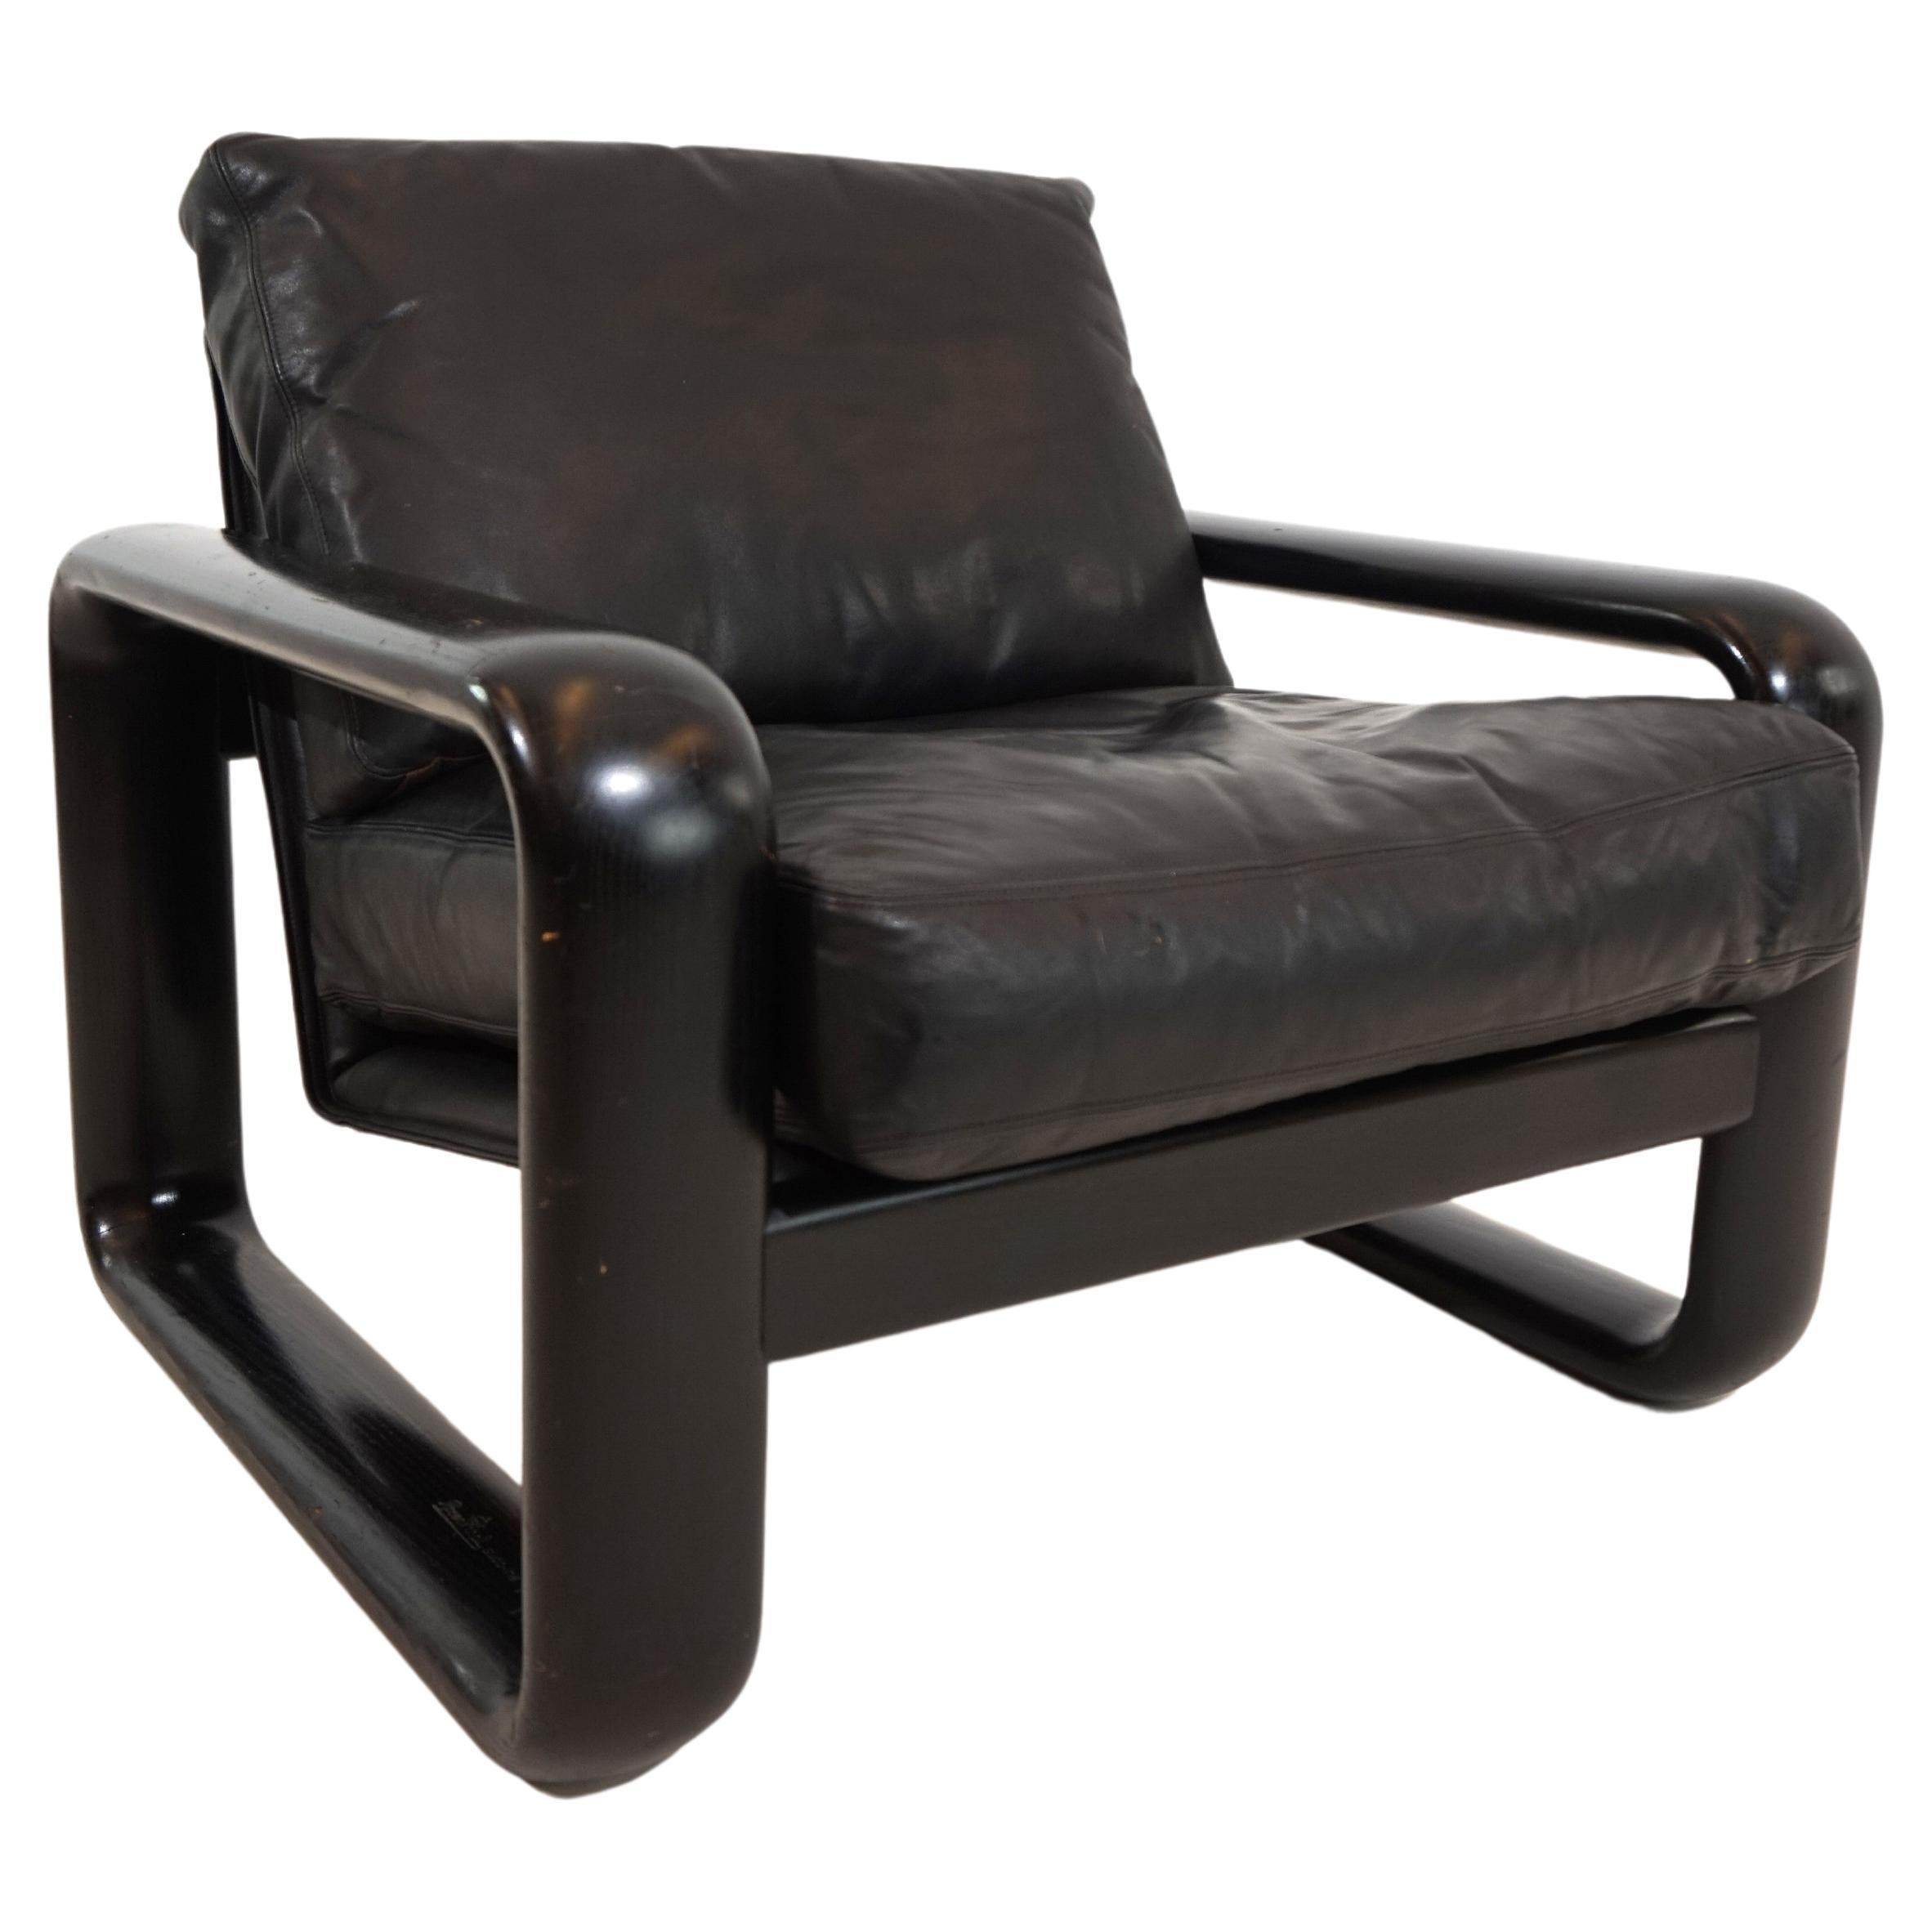 Rosenthal Hombre leather armchair by Burkhard Vogtherr For Sale